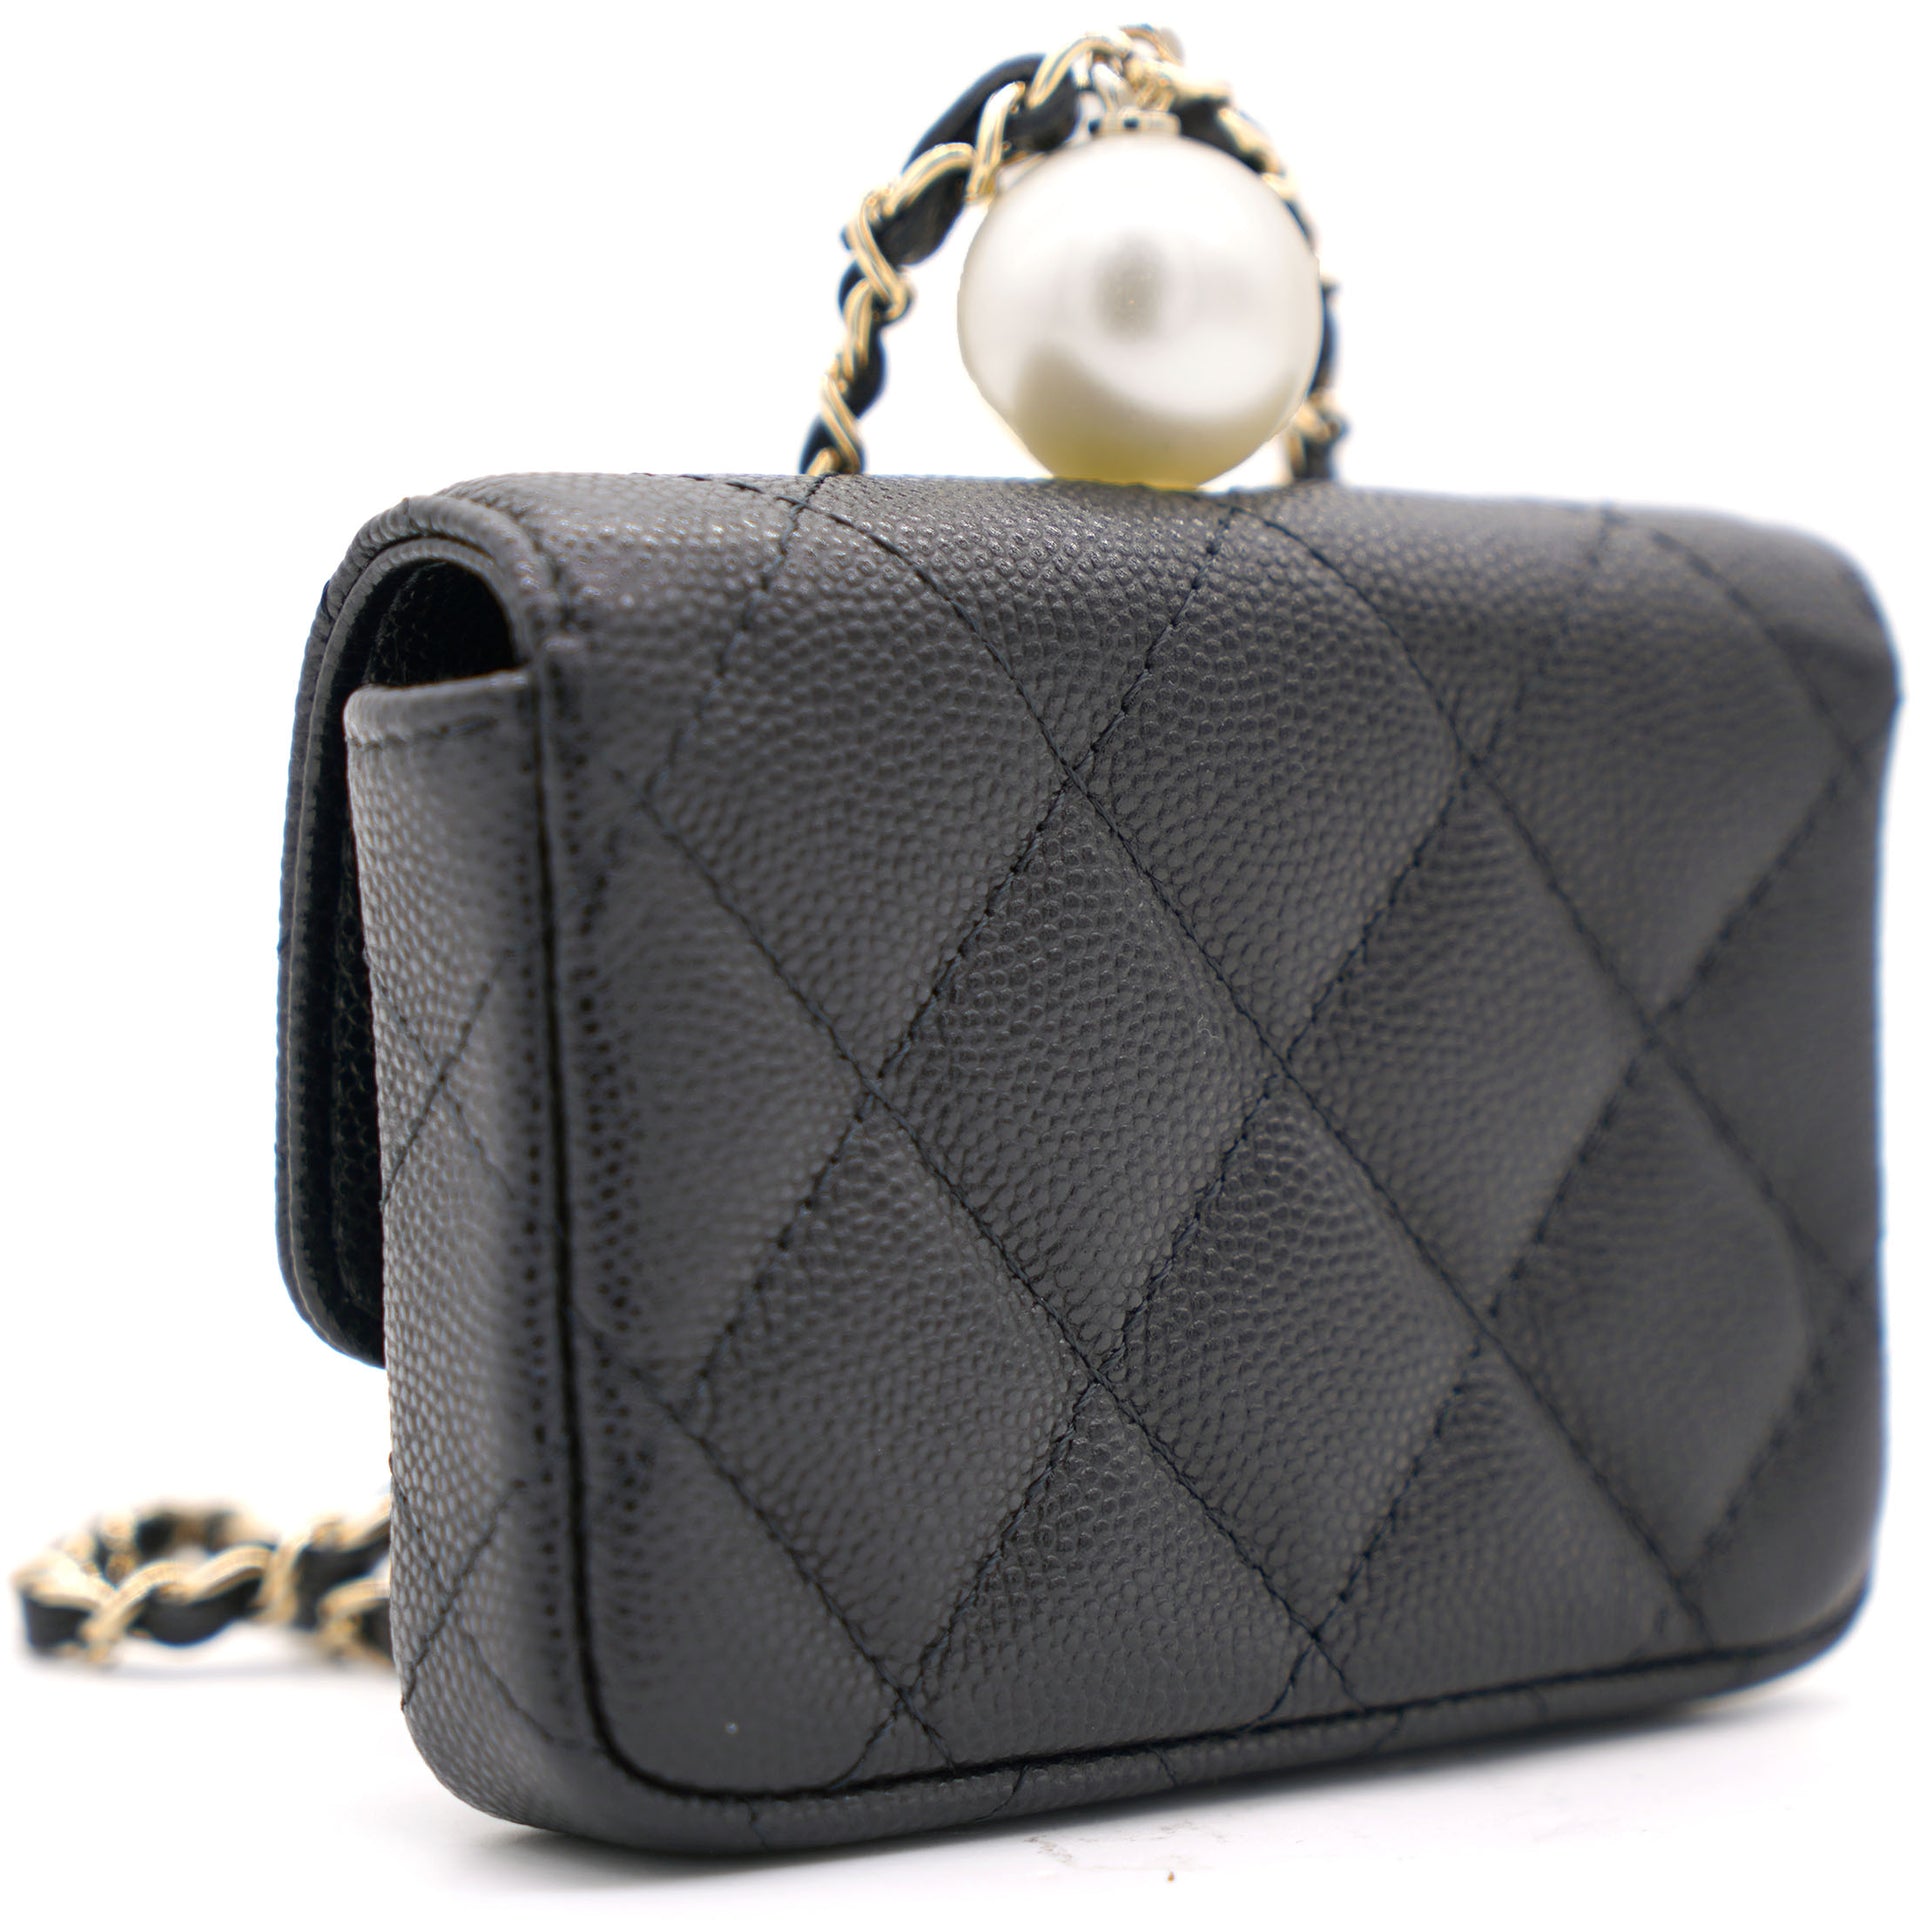 Chanel Black Caviar Leather Pearl Flap Card Holder with Short